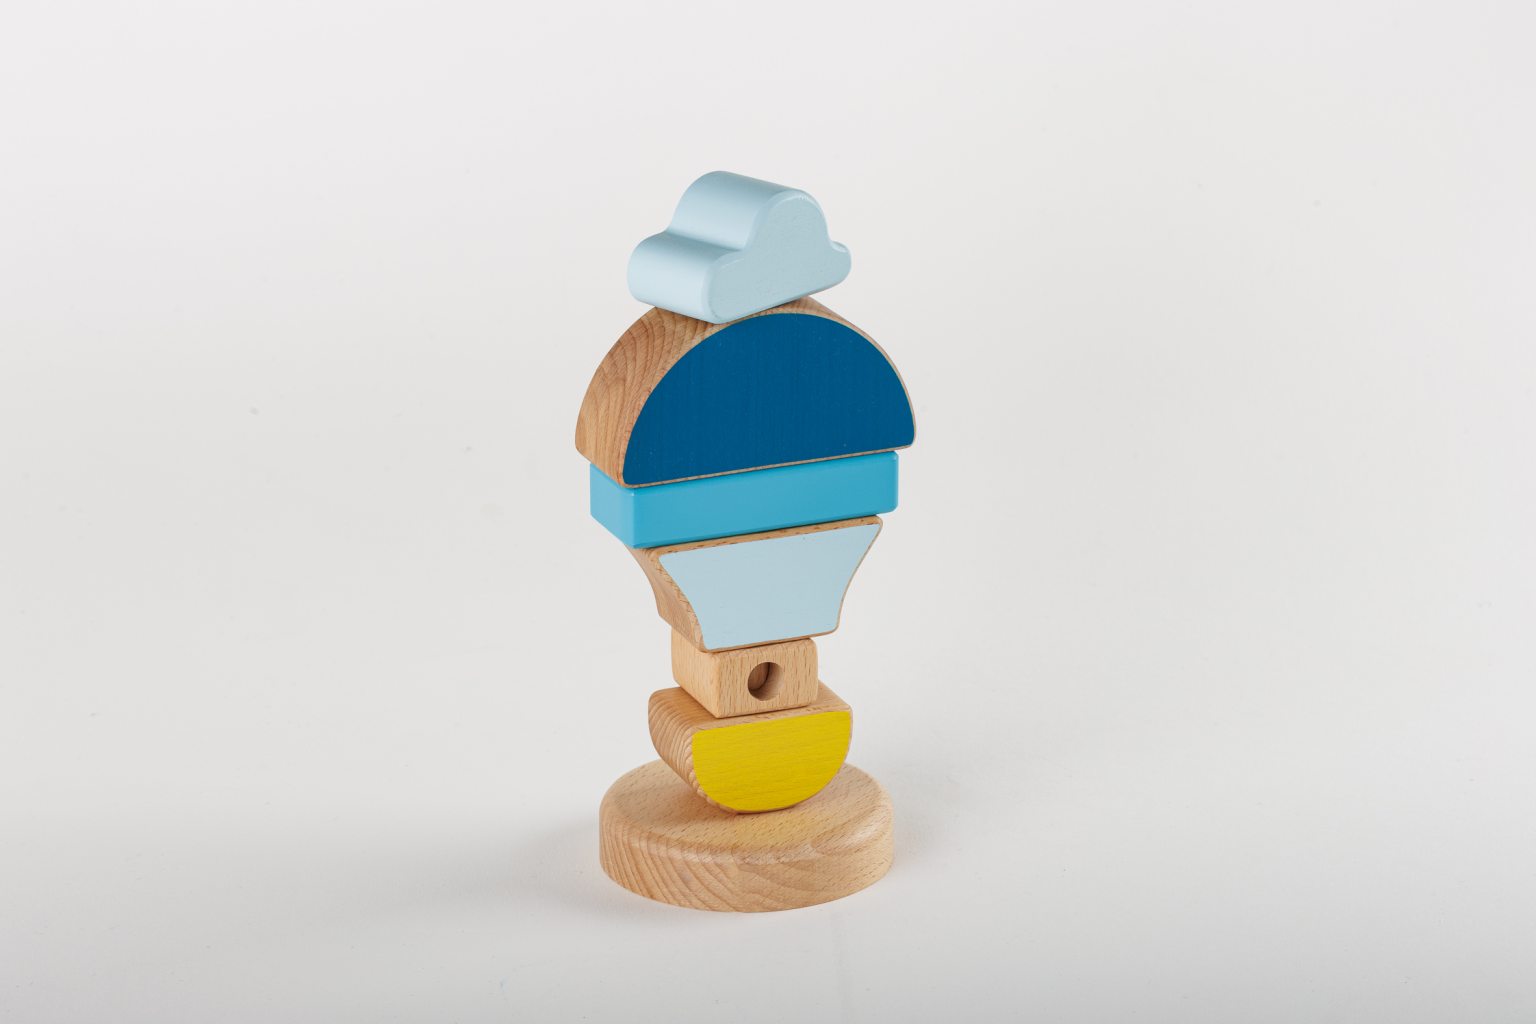 Wooden stacking game "Balloon & Cloud"